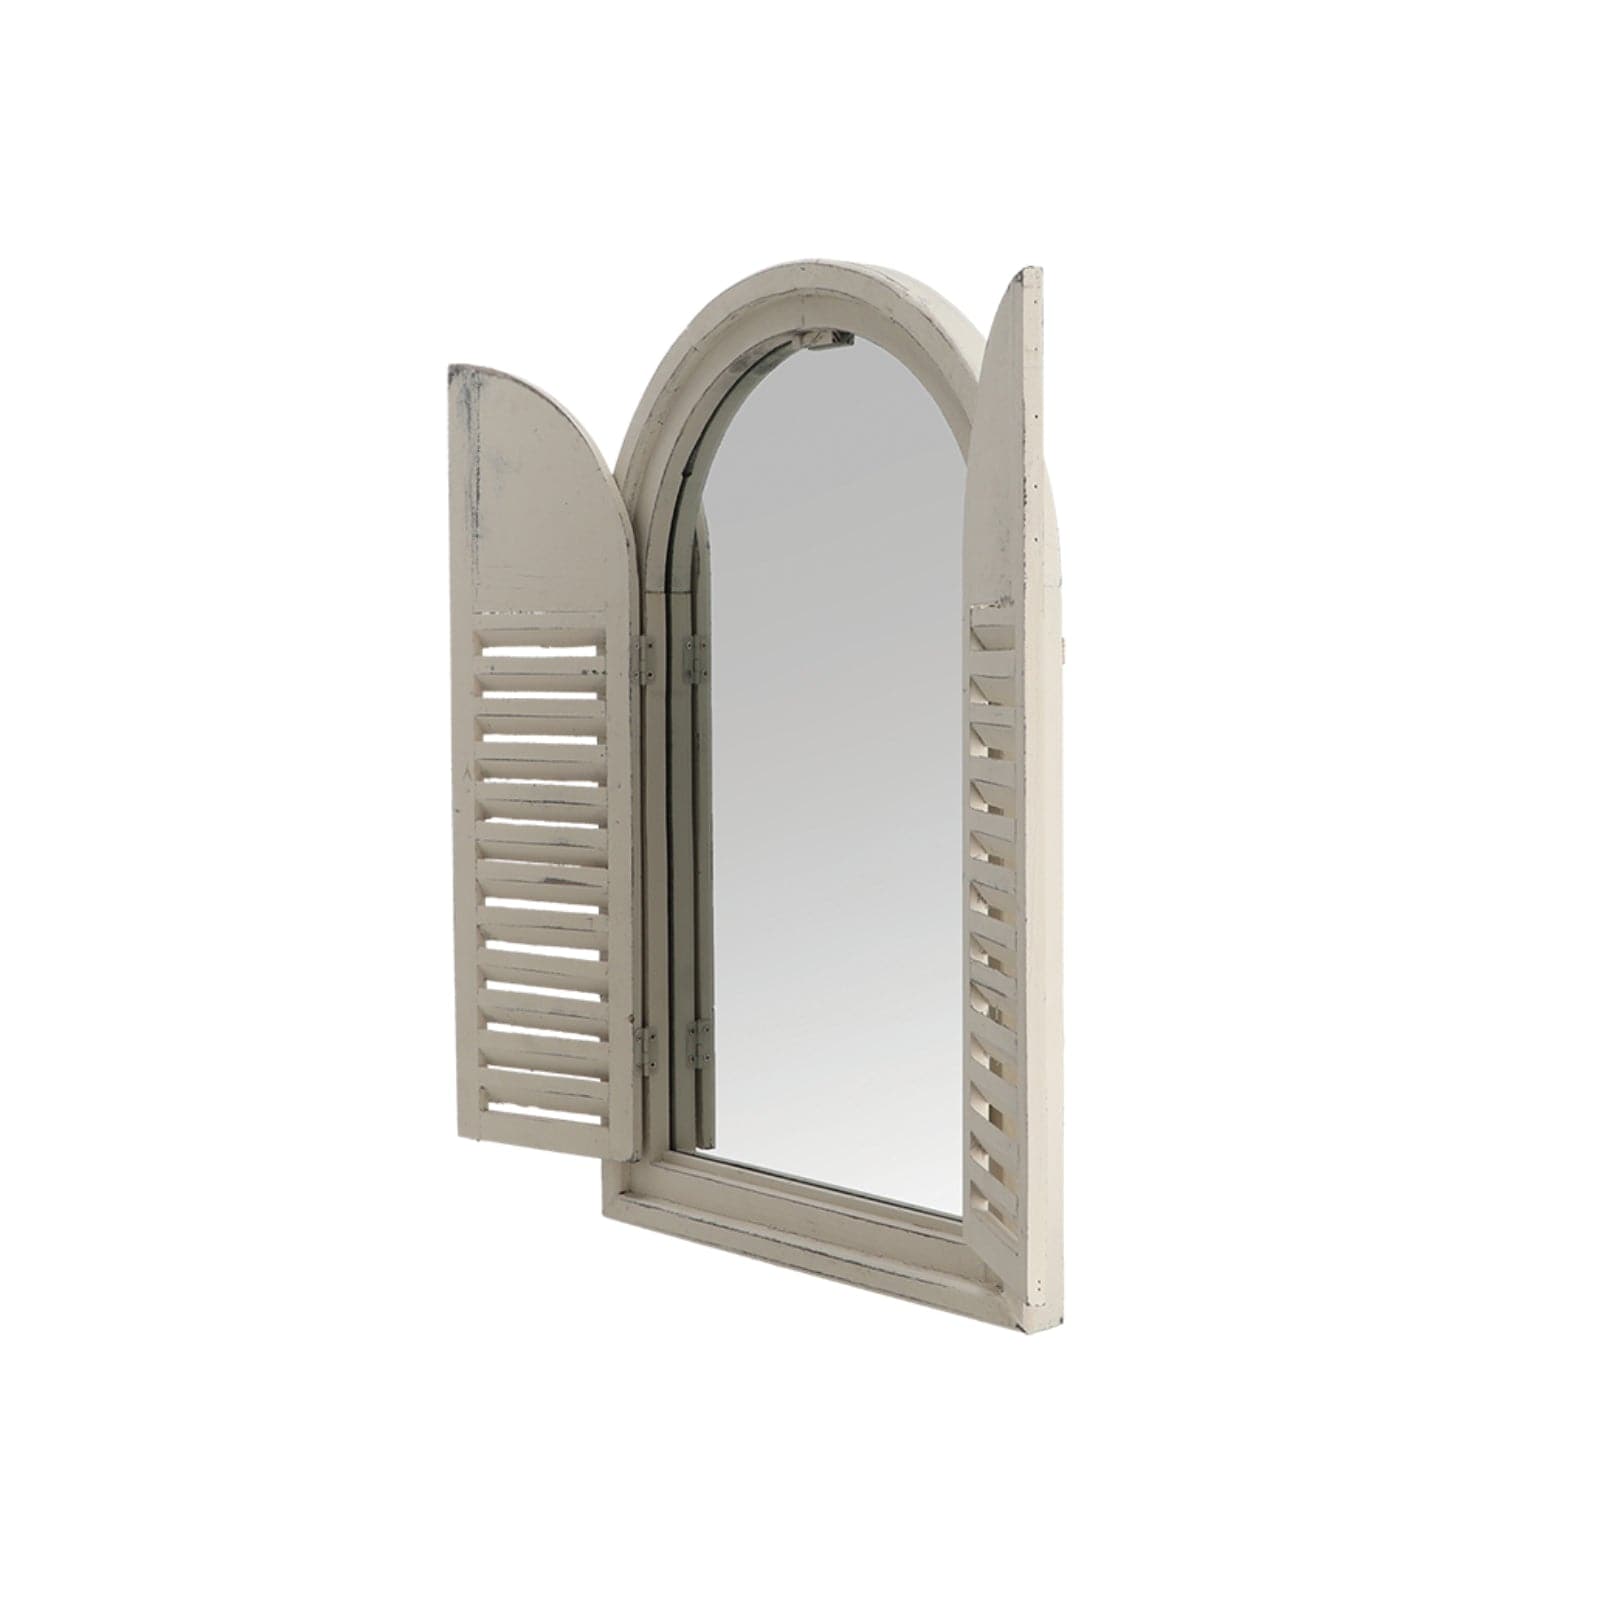 Distressed White Wooden Outdoor Shutter Wall Mirror - The Farthing